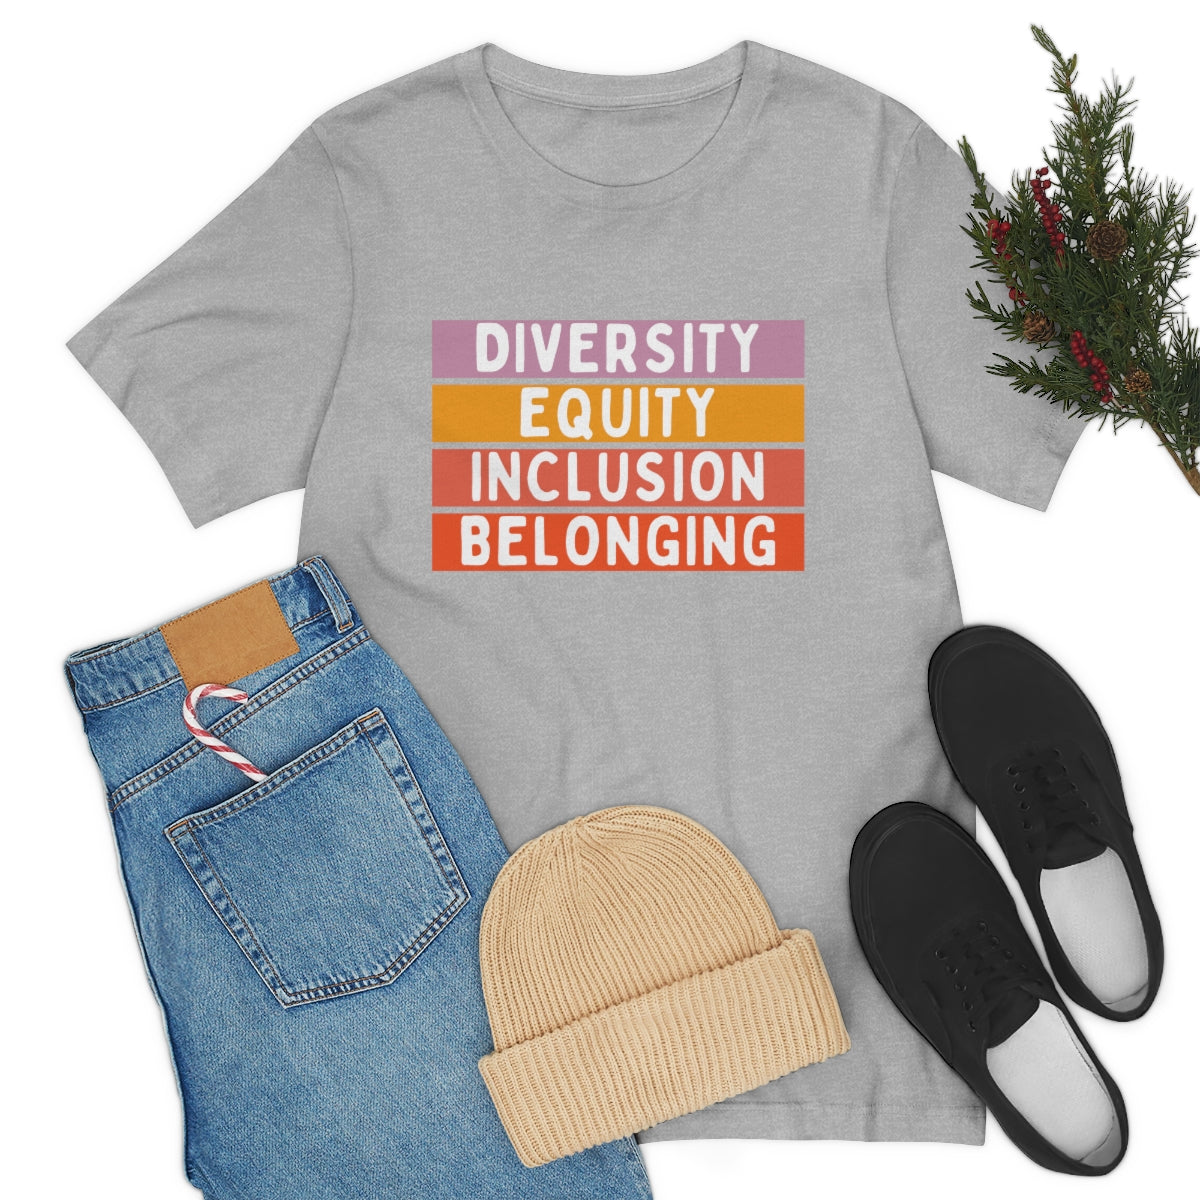 Diversity Equity Inclusion Belonging Graphic T shirts, DEIB, DIB, Shirts for HR Professionals and dei Leaders